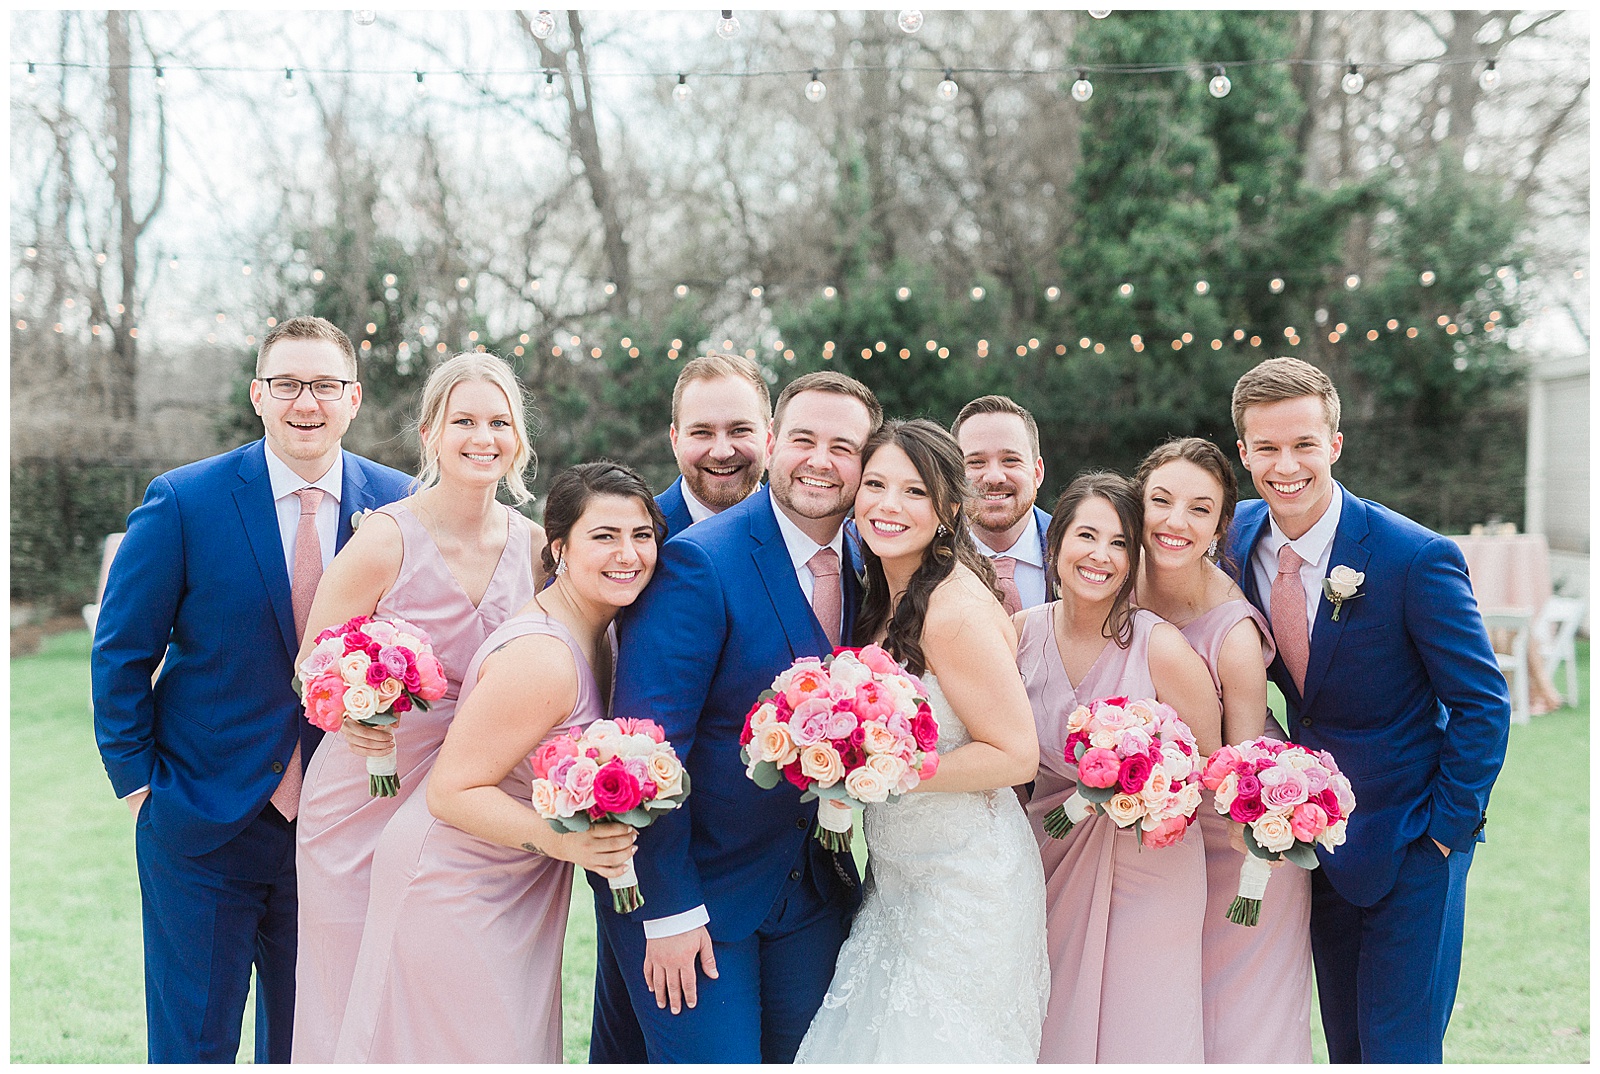 Soft Pink Navy Blue Color Theme Bridesmaid Bride Tribe and Groomsmen Group Photo from Light and Airy Outdoor Wedding at Separk Mansion in Gastonia, NC | Kevyn Dixon Photography